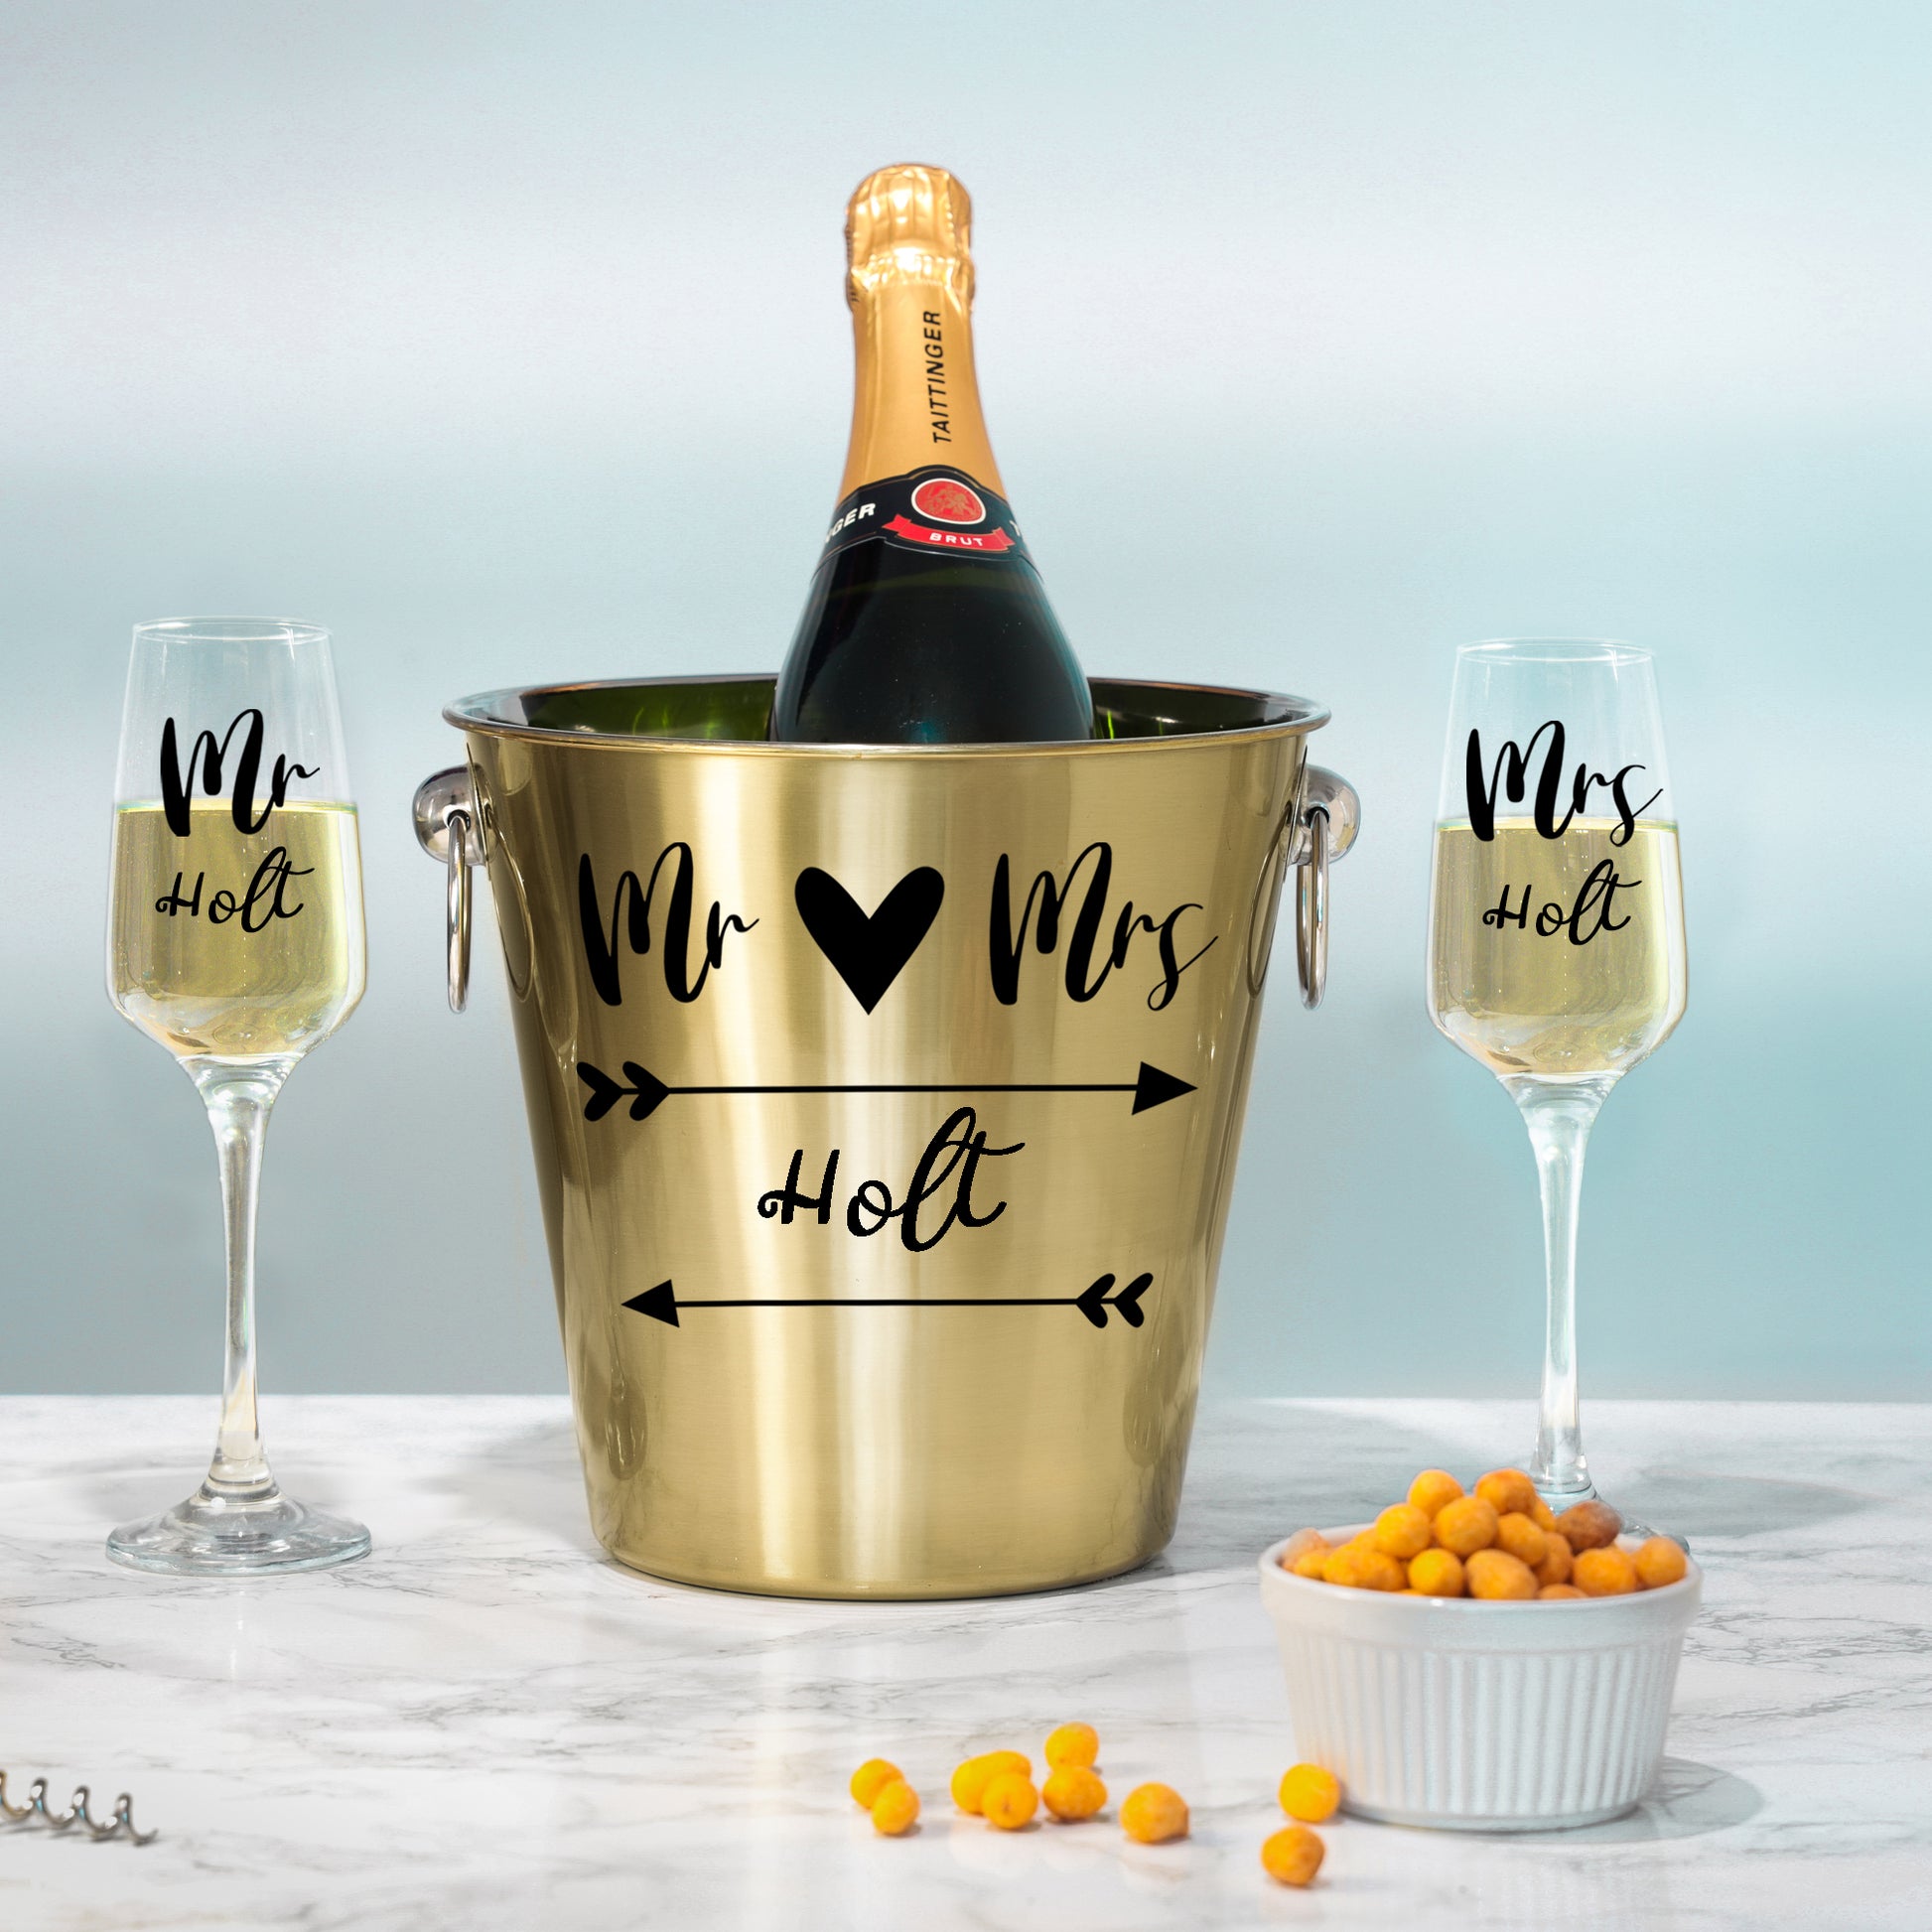 Personalised Wedding Gold Ice Bucket With matching Champagne Glasses  - Always Looking Good - Ice Bucket With Matching Glasses  